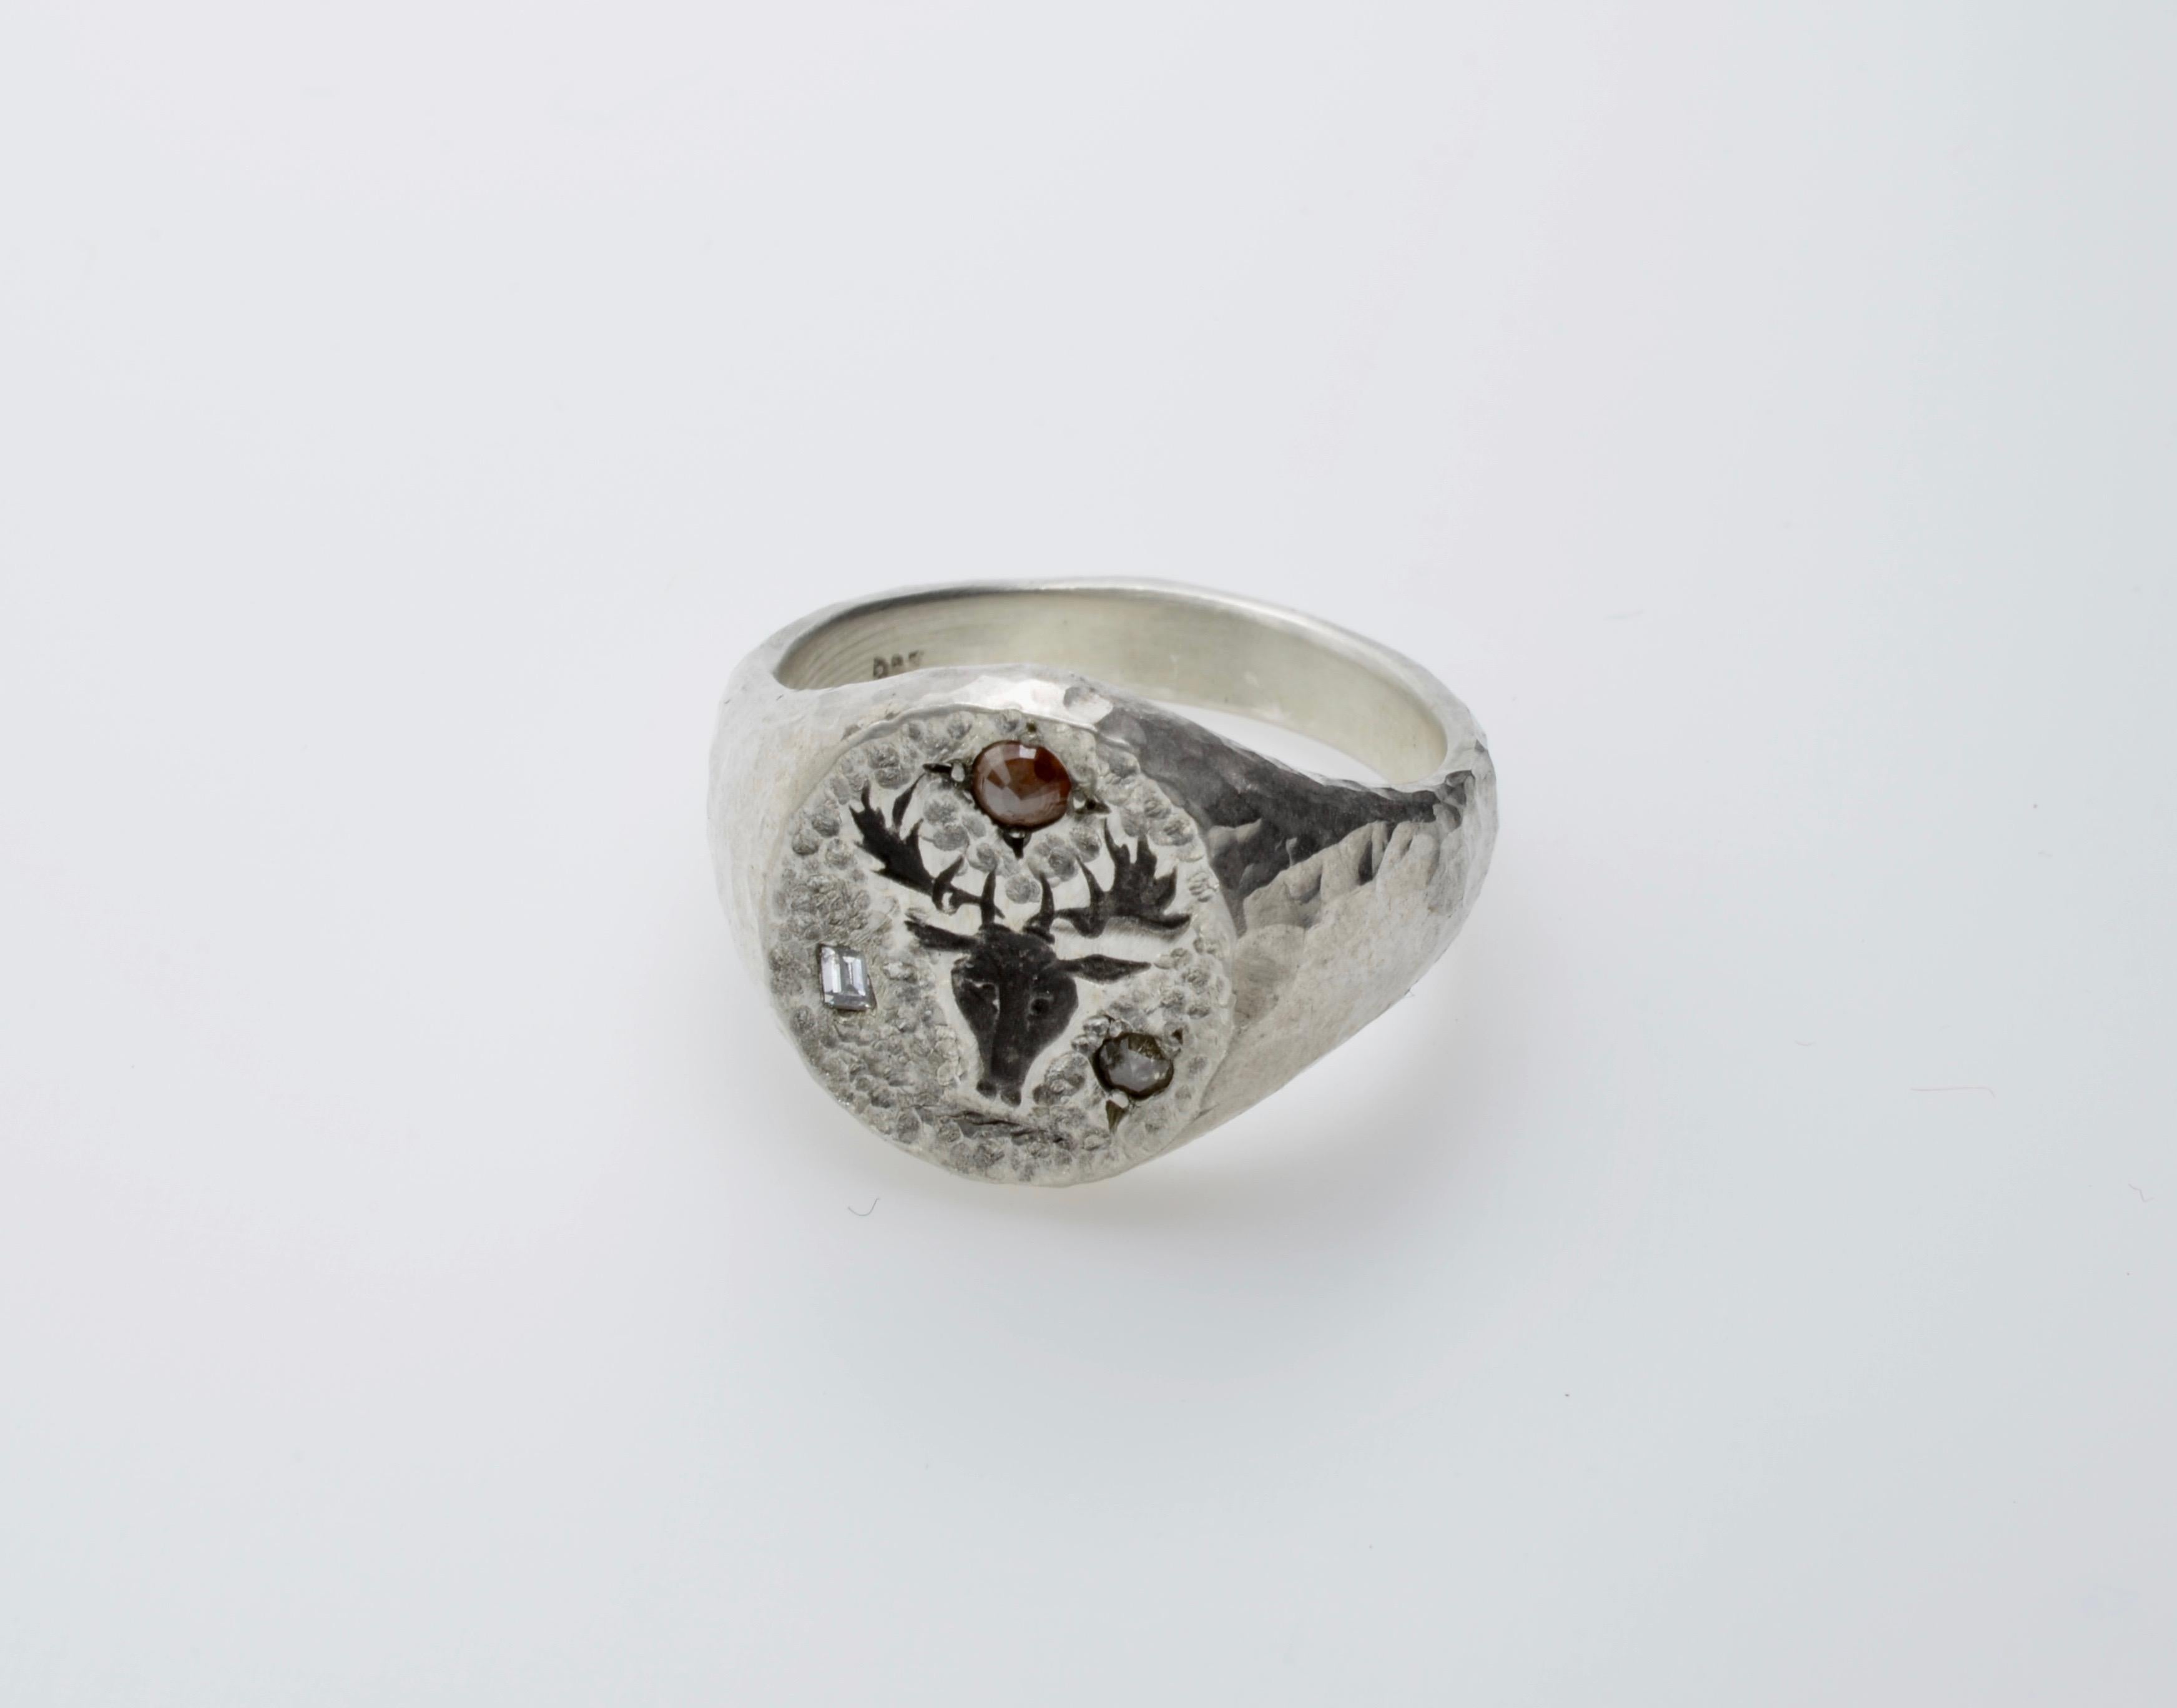 Traditional shape of a signet ring, with the particularity of the hammered texture in silver and set with diamonds. The one baguette diamond and two round diamonds are 0.15 carats total weight.  The diamonds add a modern look to the ring. The top is